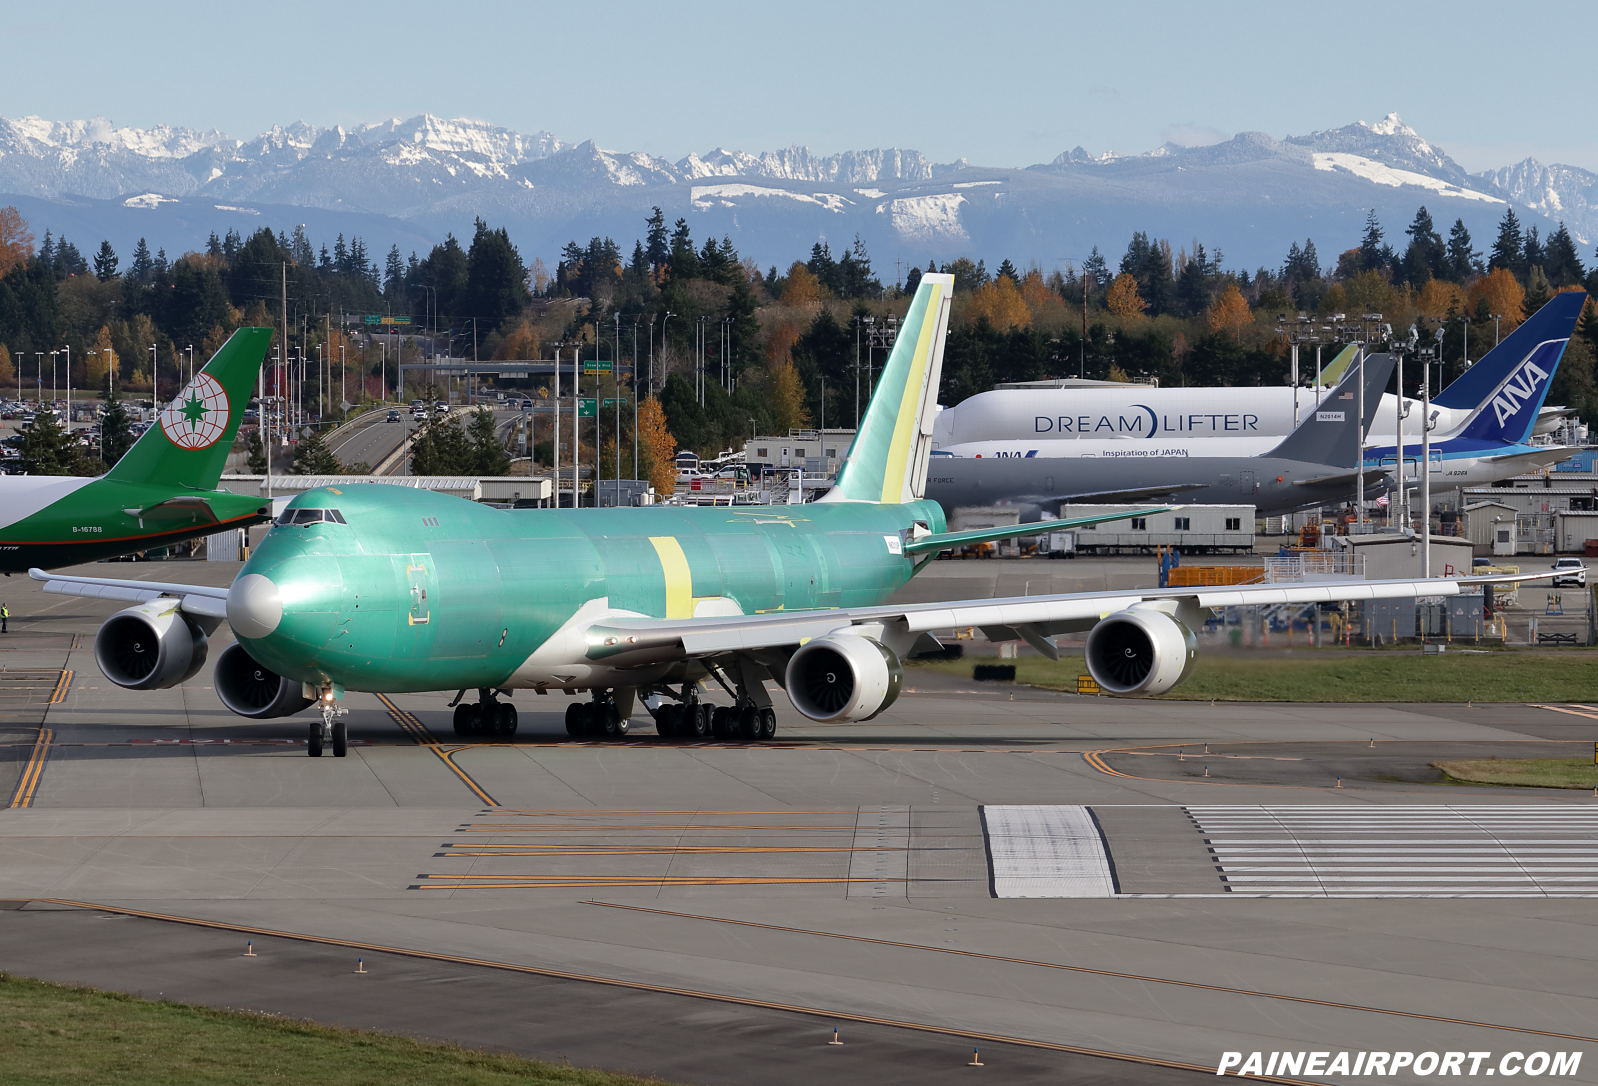 UPS 747-8F N631UP at KPAE Paine Field